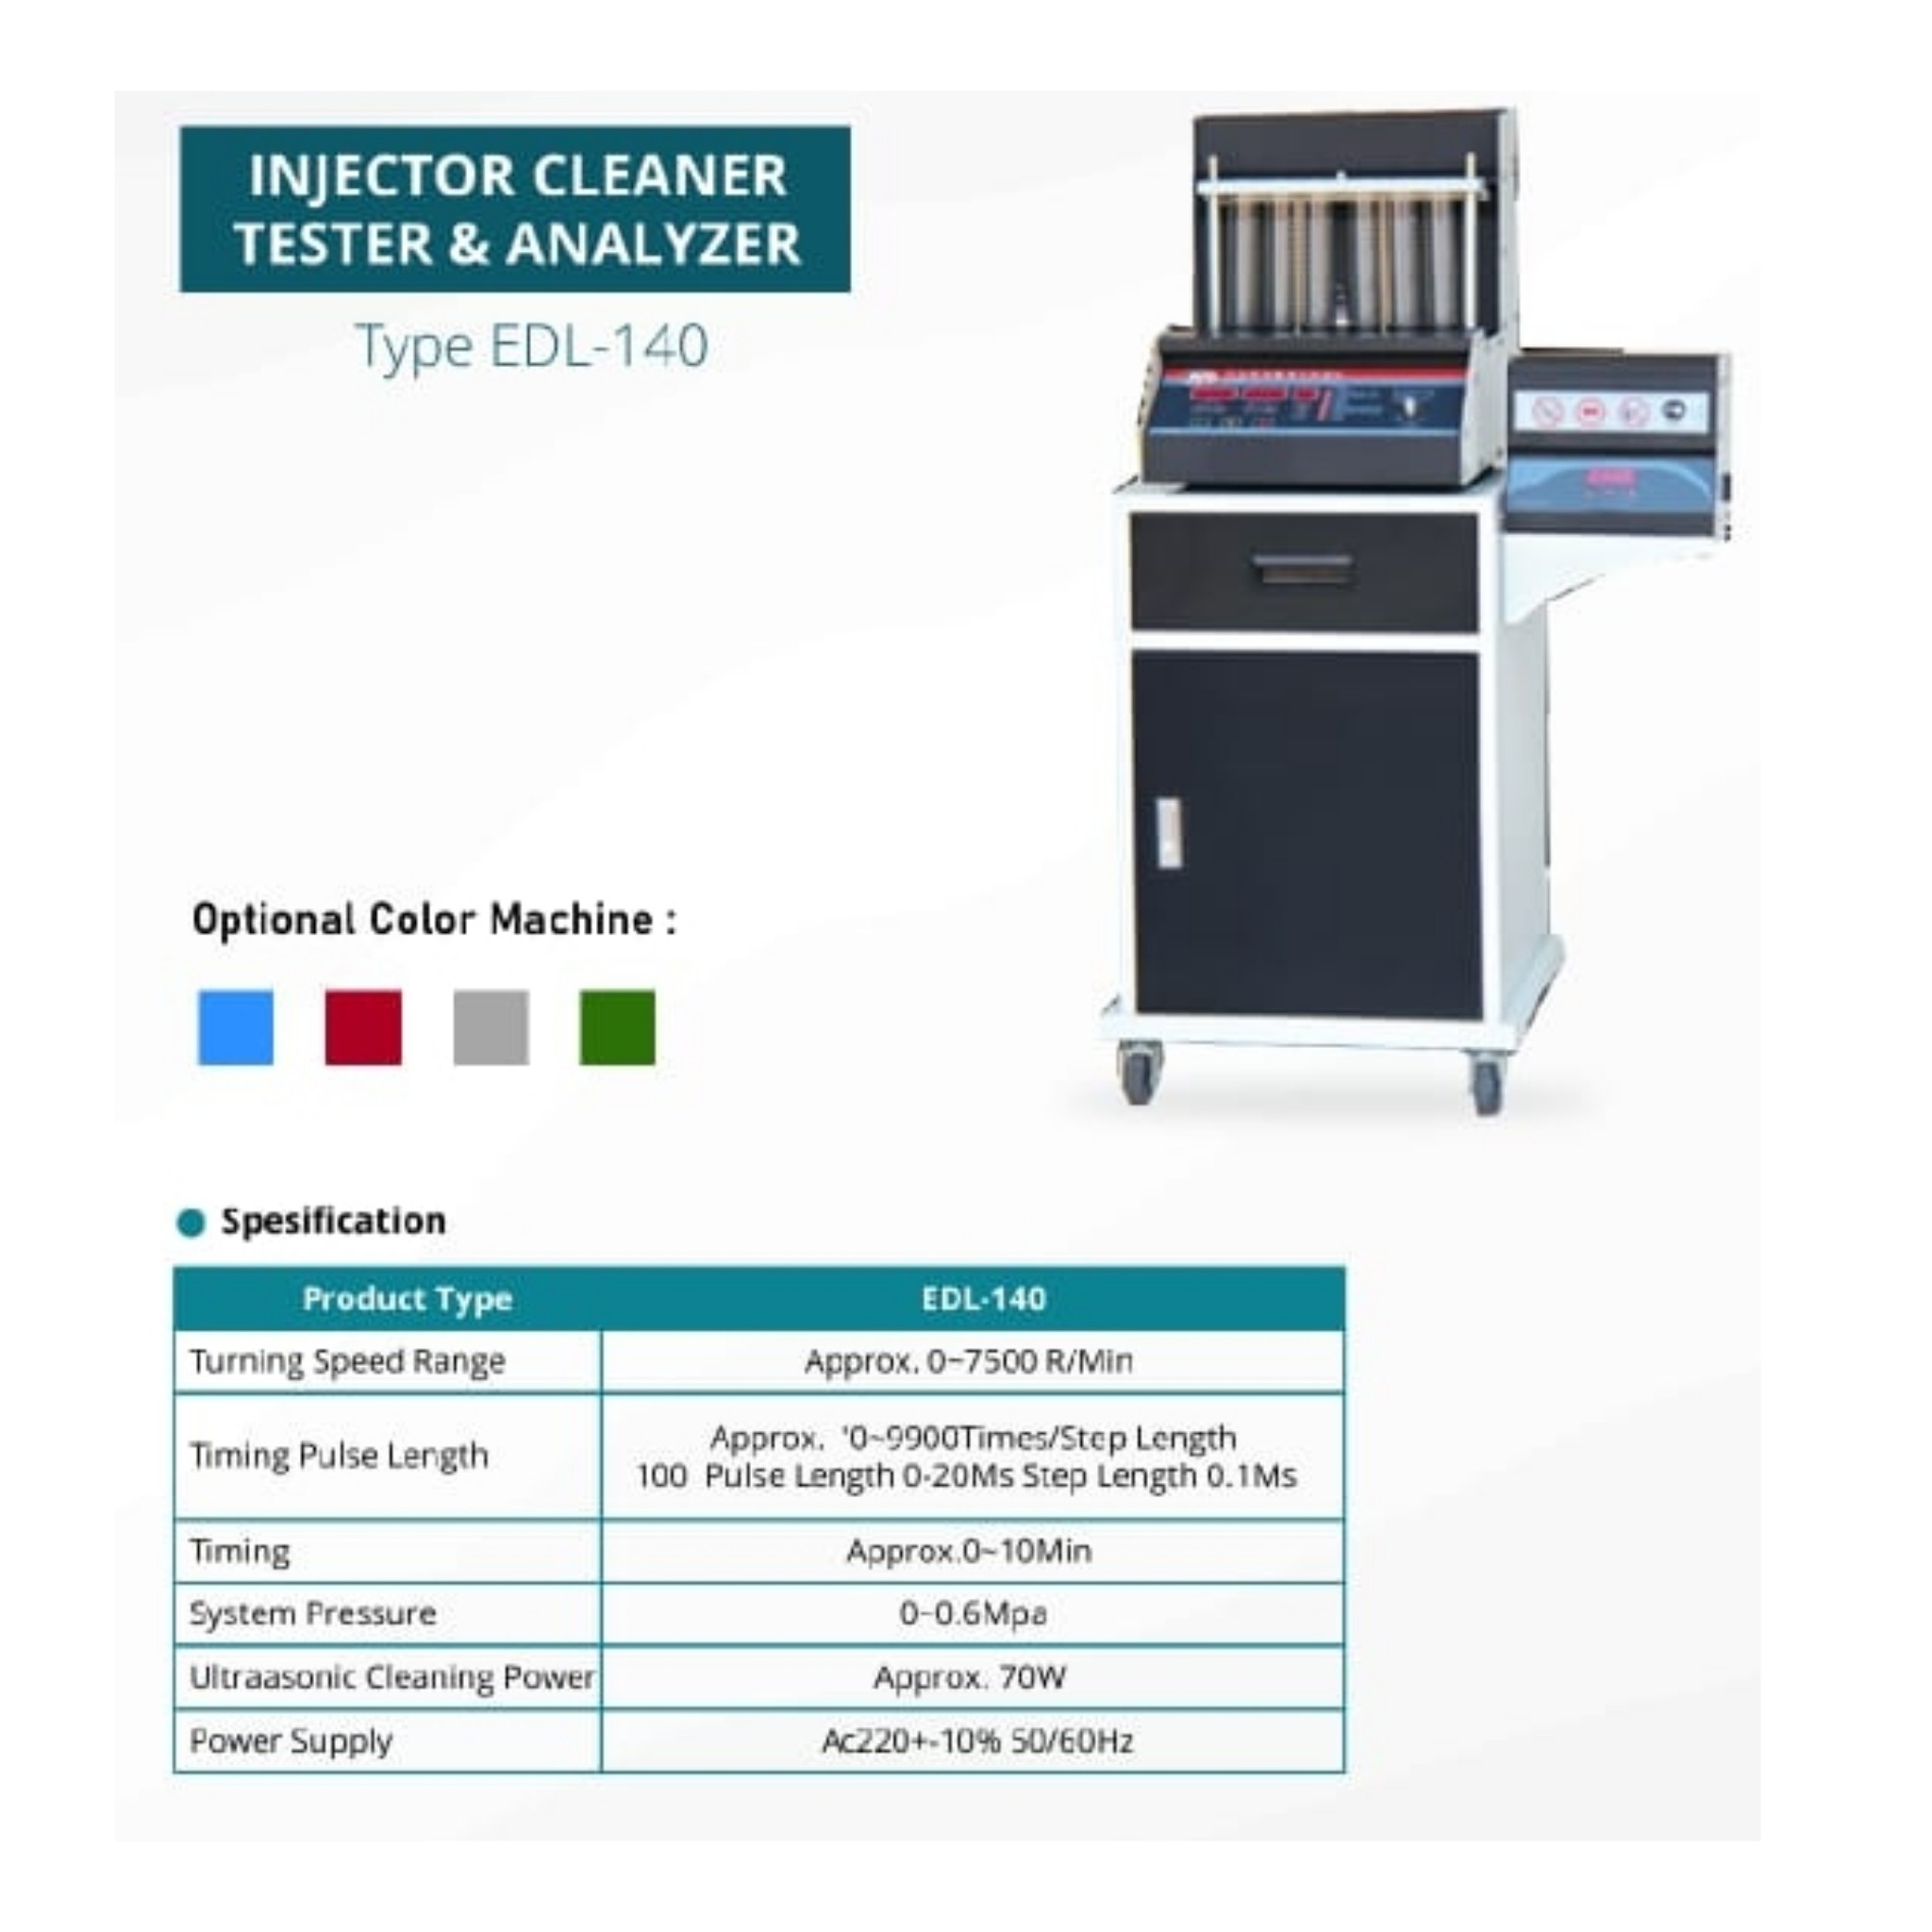 Injector Cleaner Tester Analyzer